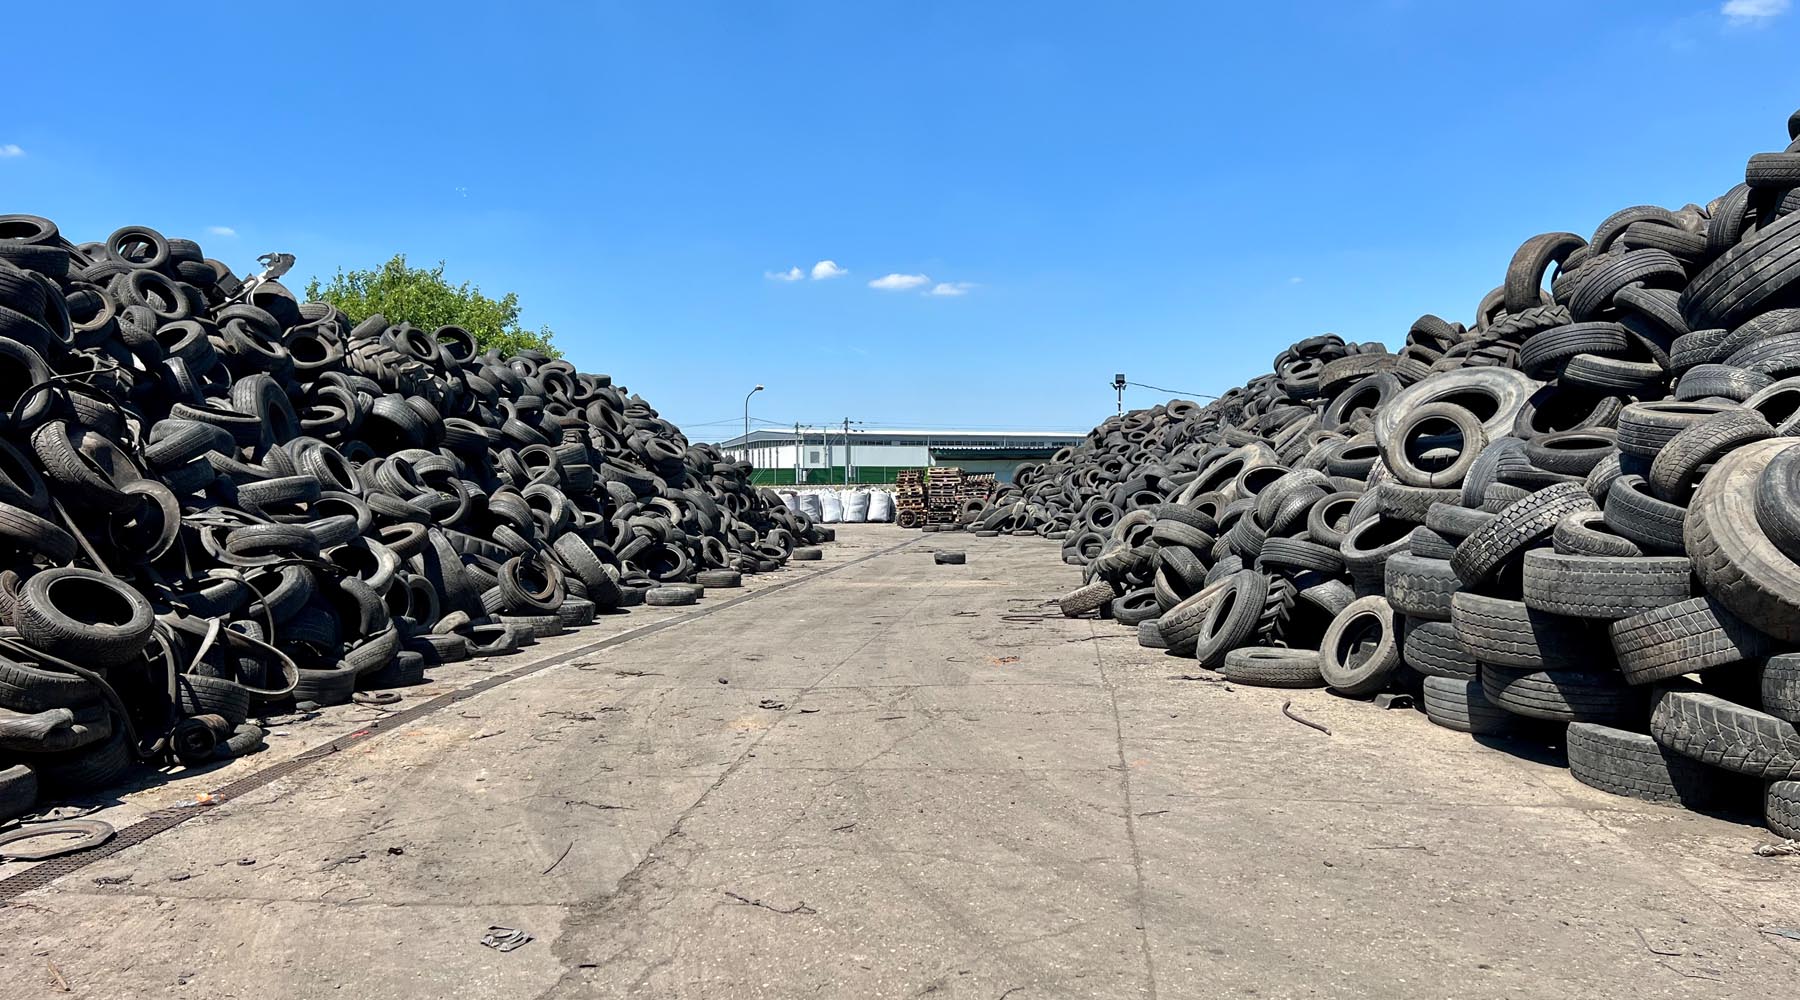 Why is it necessary to recycle old tires?